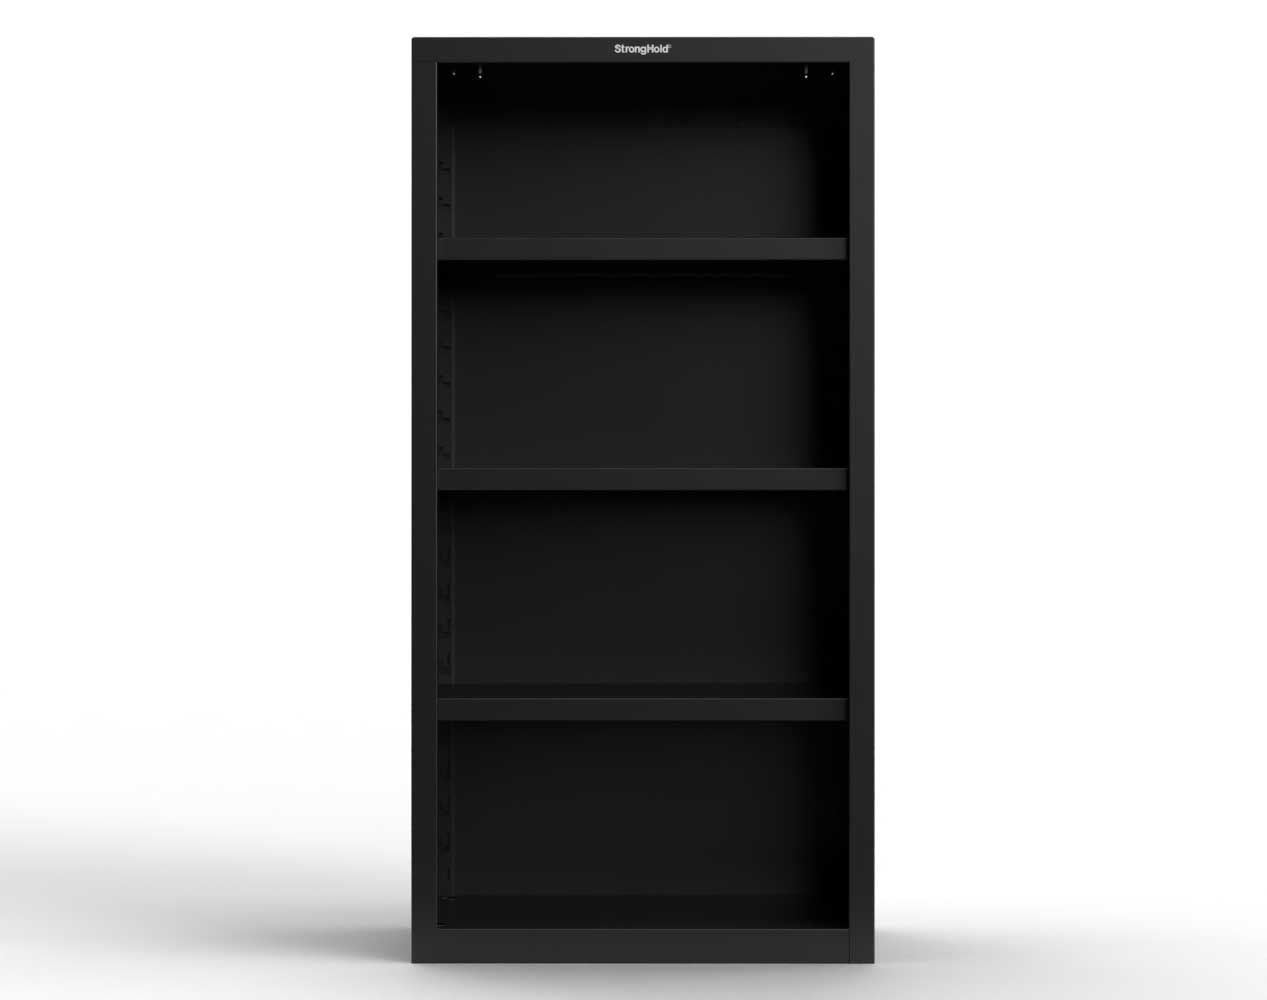 Heavy Duty 18 GA Closed Shelving Unit with 3 Shelves - 36 in. W x 24 in. D x 72 in. H